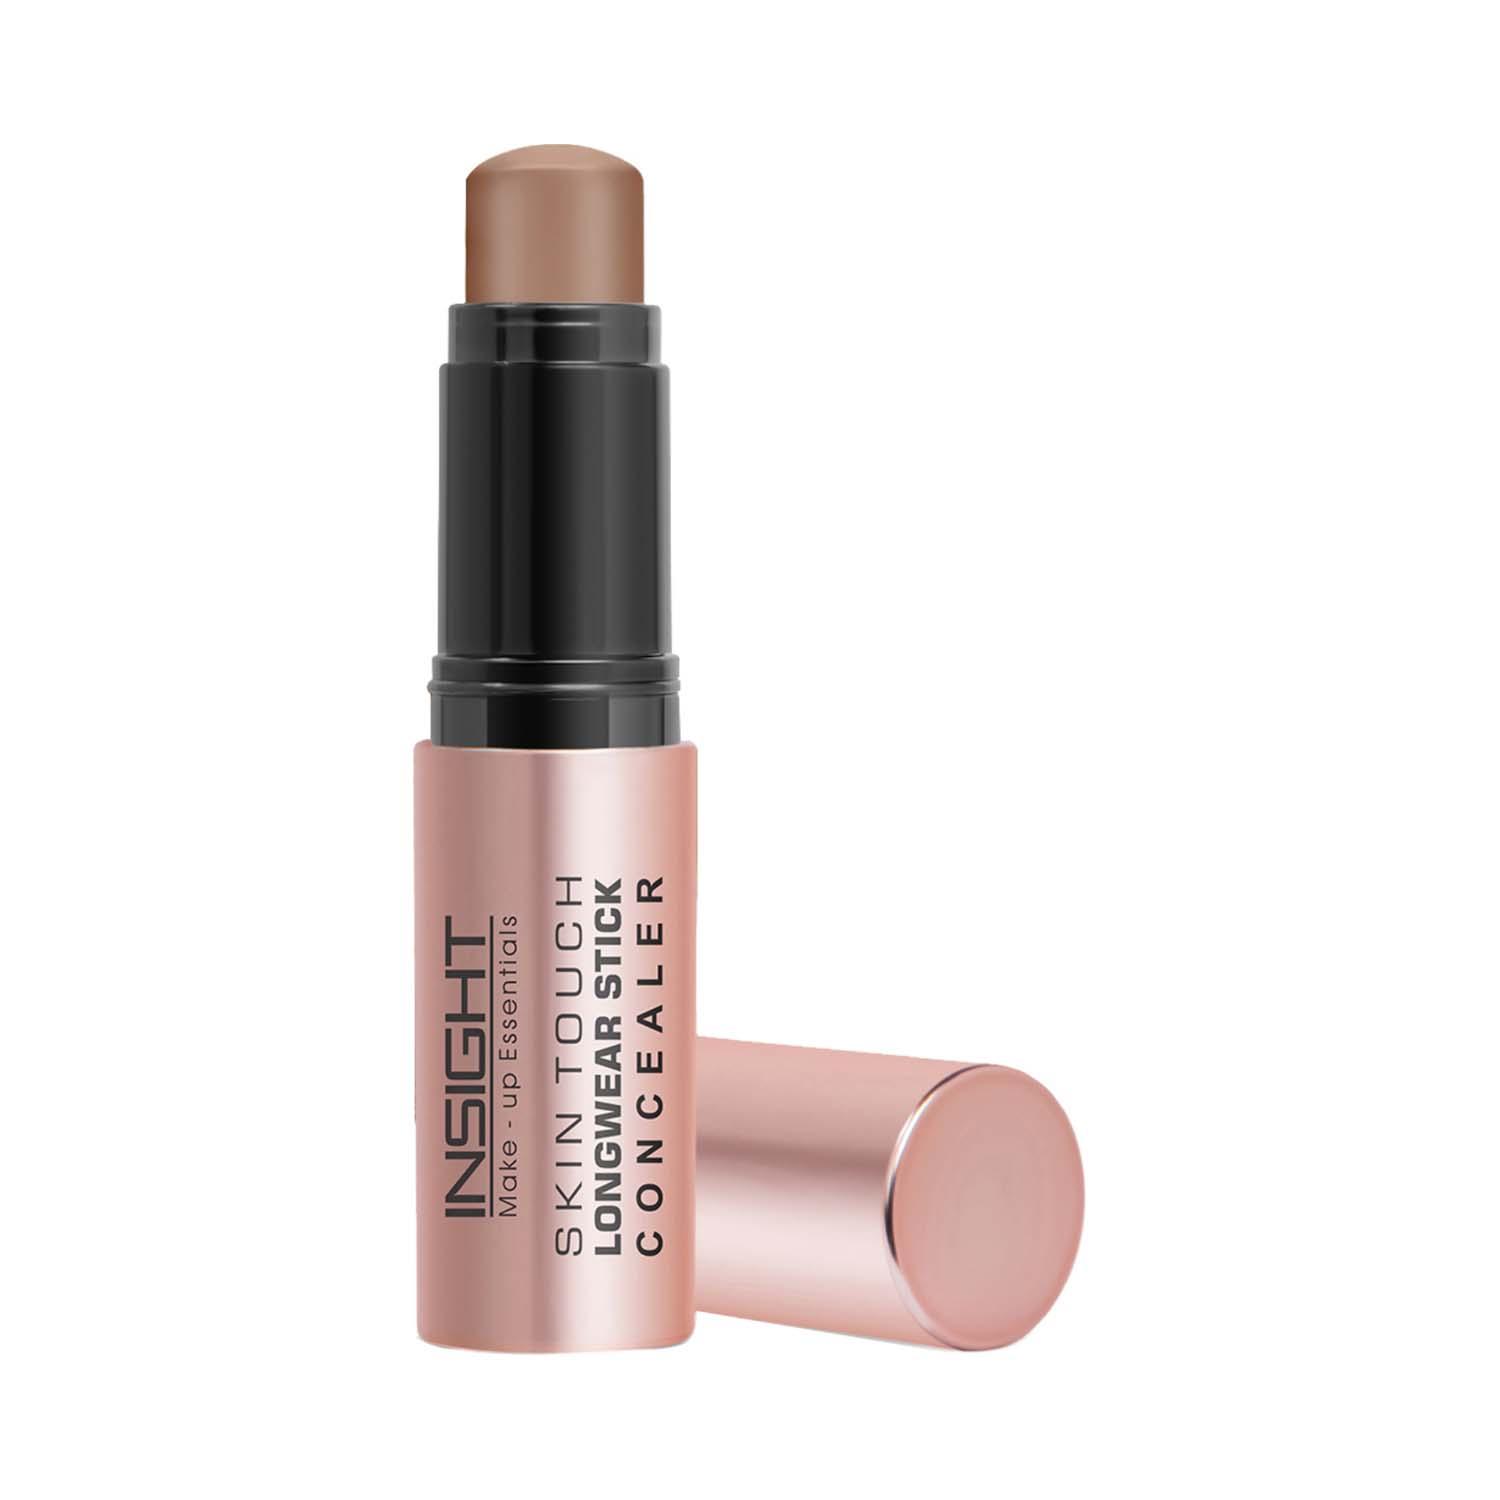 Insight Cosmetics | Insight Cosmetics Skin Touch Longwear Concealer - Contour (5 g)